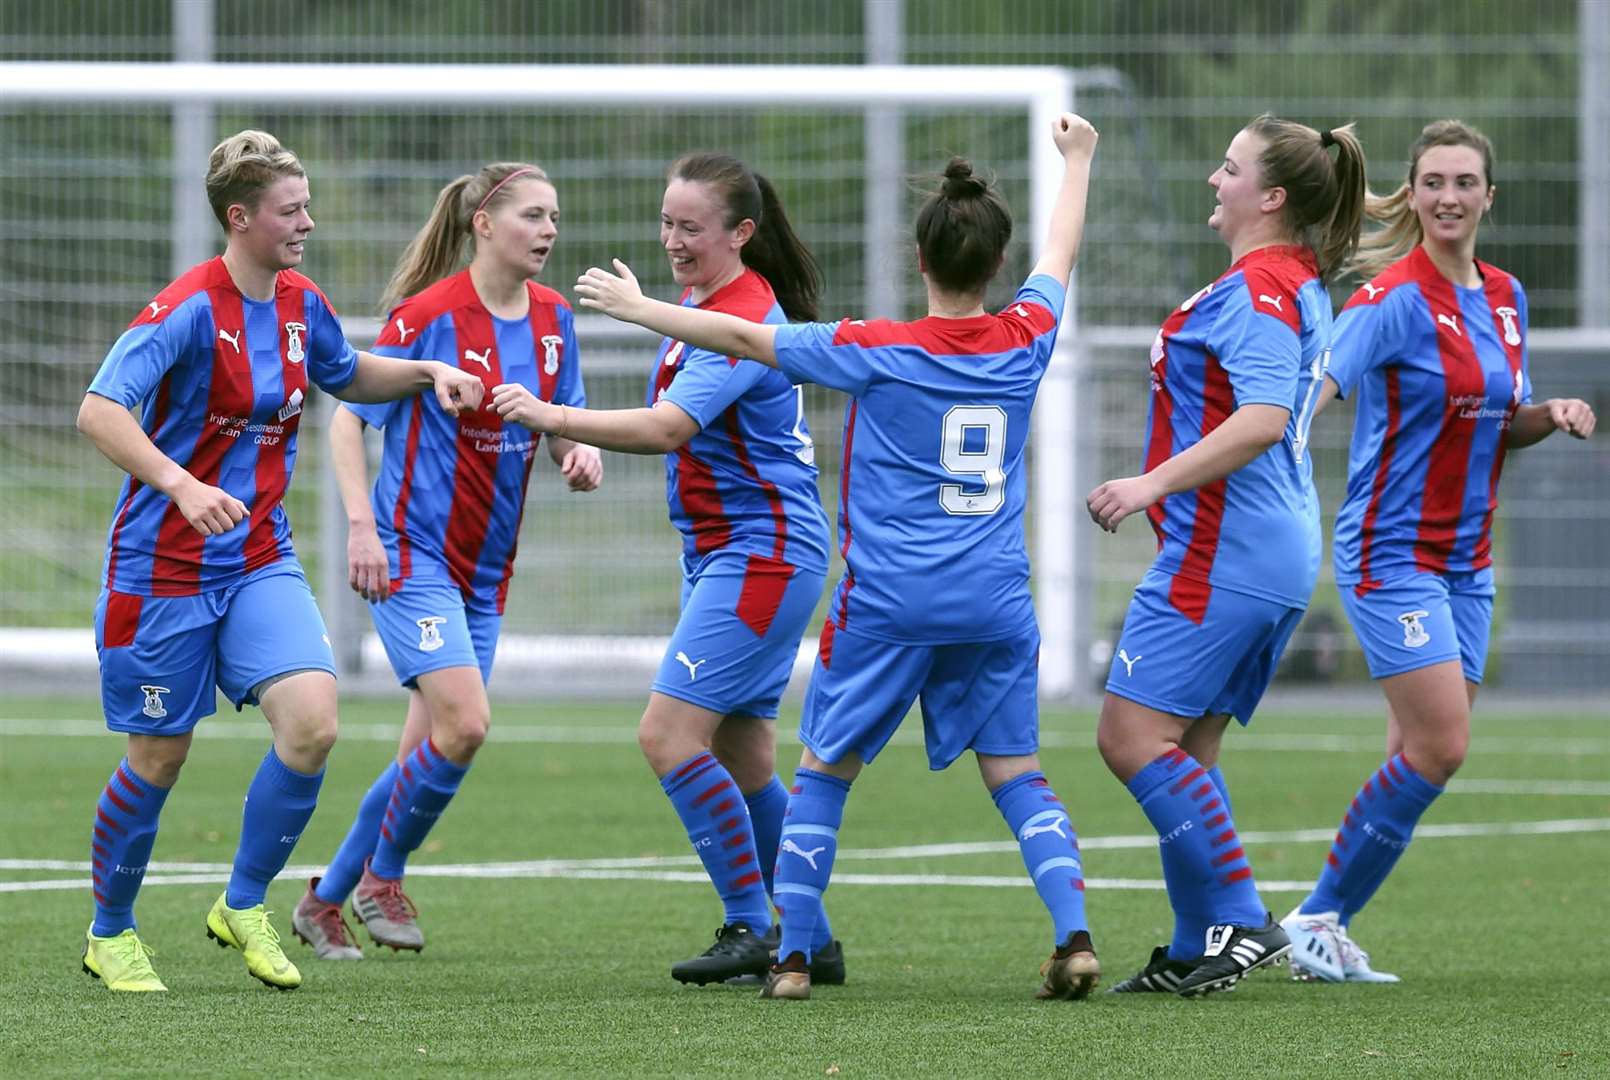 Picture - Ken Macpherson, Inverness. Inverness CT WFC(5) v Westdyke(1). 18.10.20. ICT WFC debutant Lorna Macrae (extreme left) celebrates after scoring her 3rd goal. She scored a total of four goals in her 1st start for the ladies!